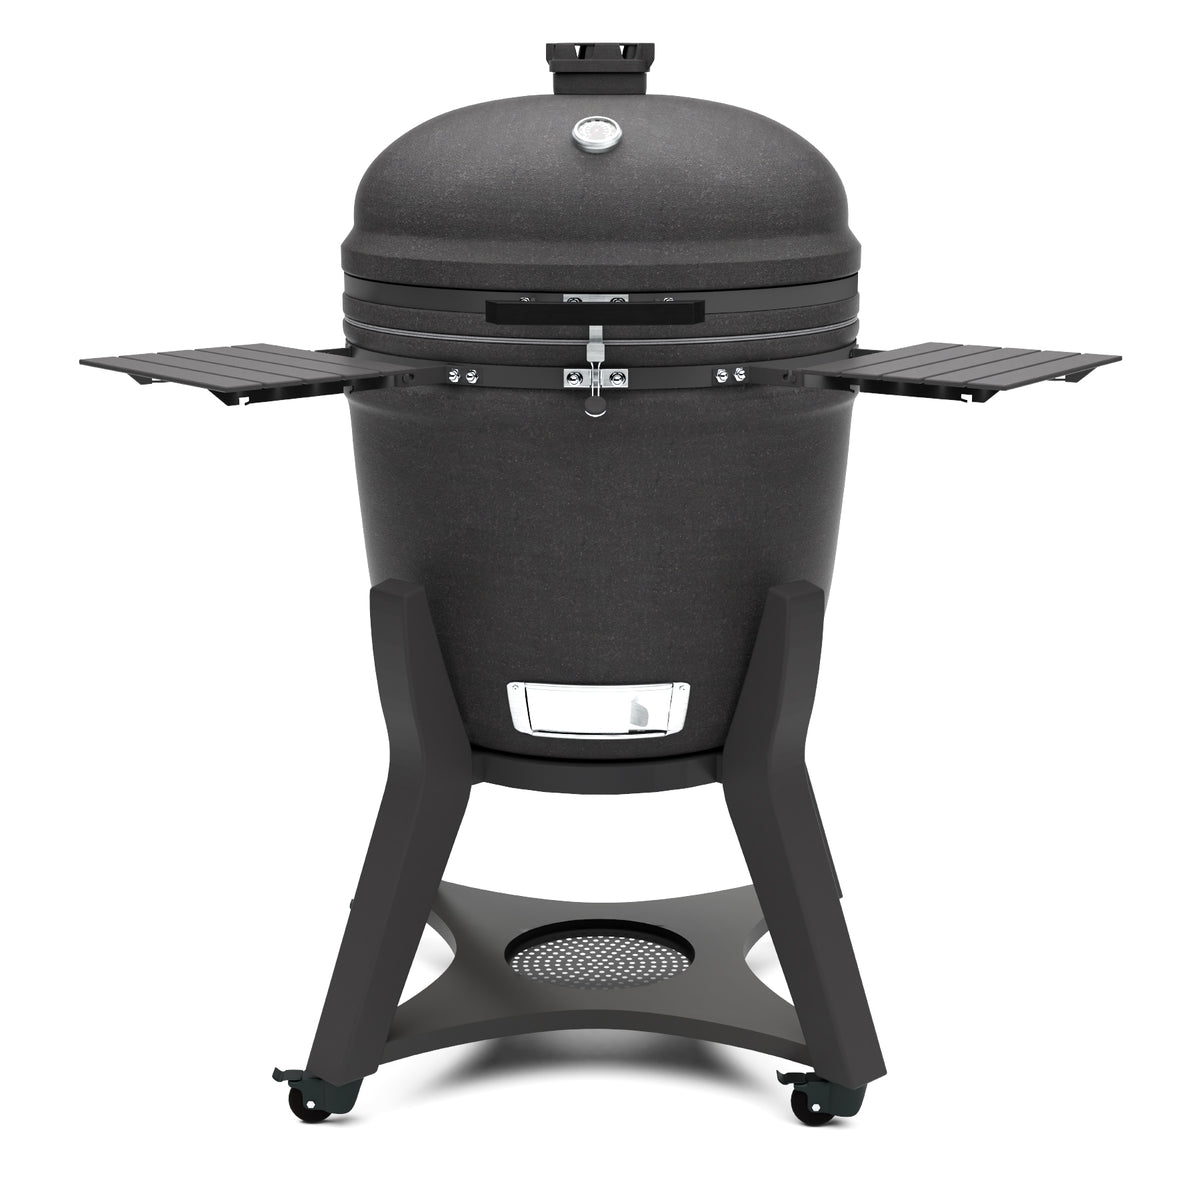 Draco Grills 27 Inch Kamado Grill with Aluminium Stand